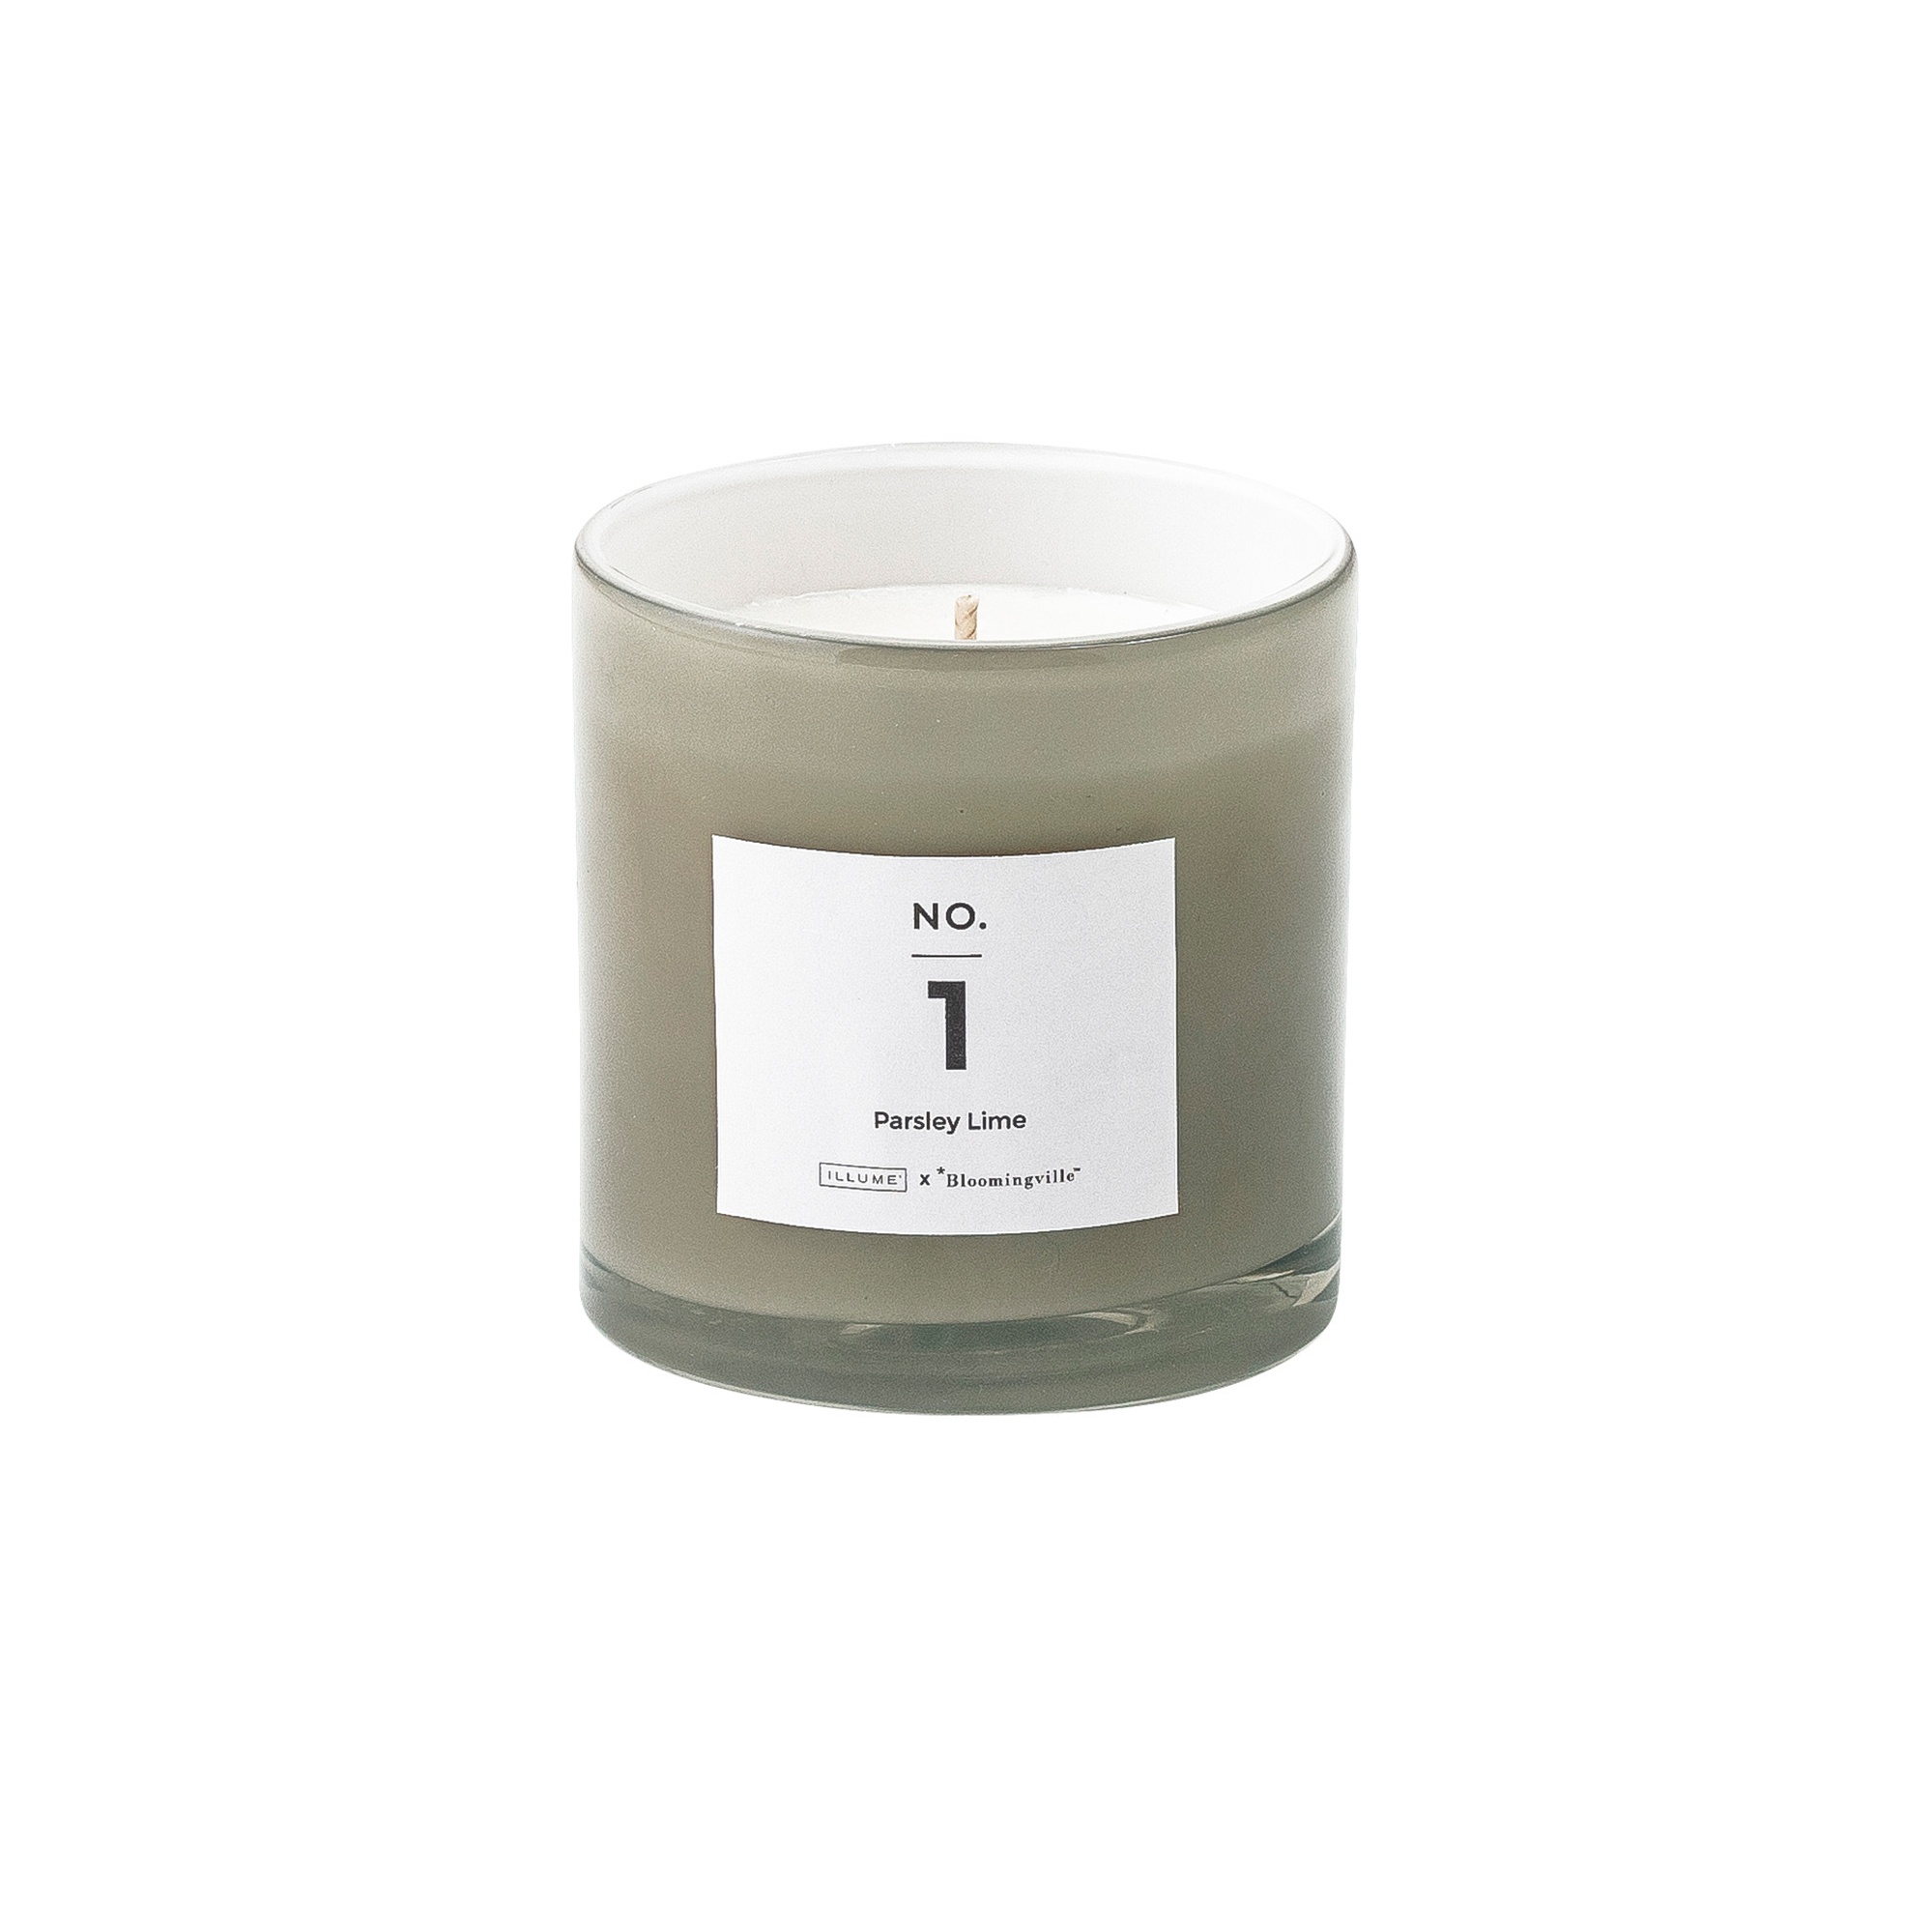 No. 1 Parsley Lime Scented Candle